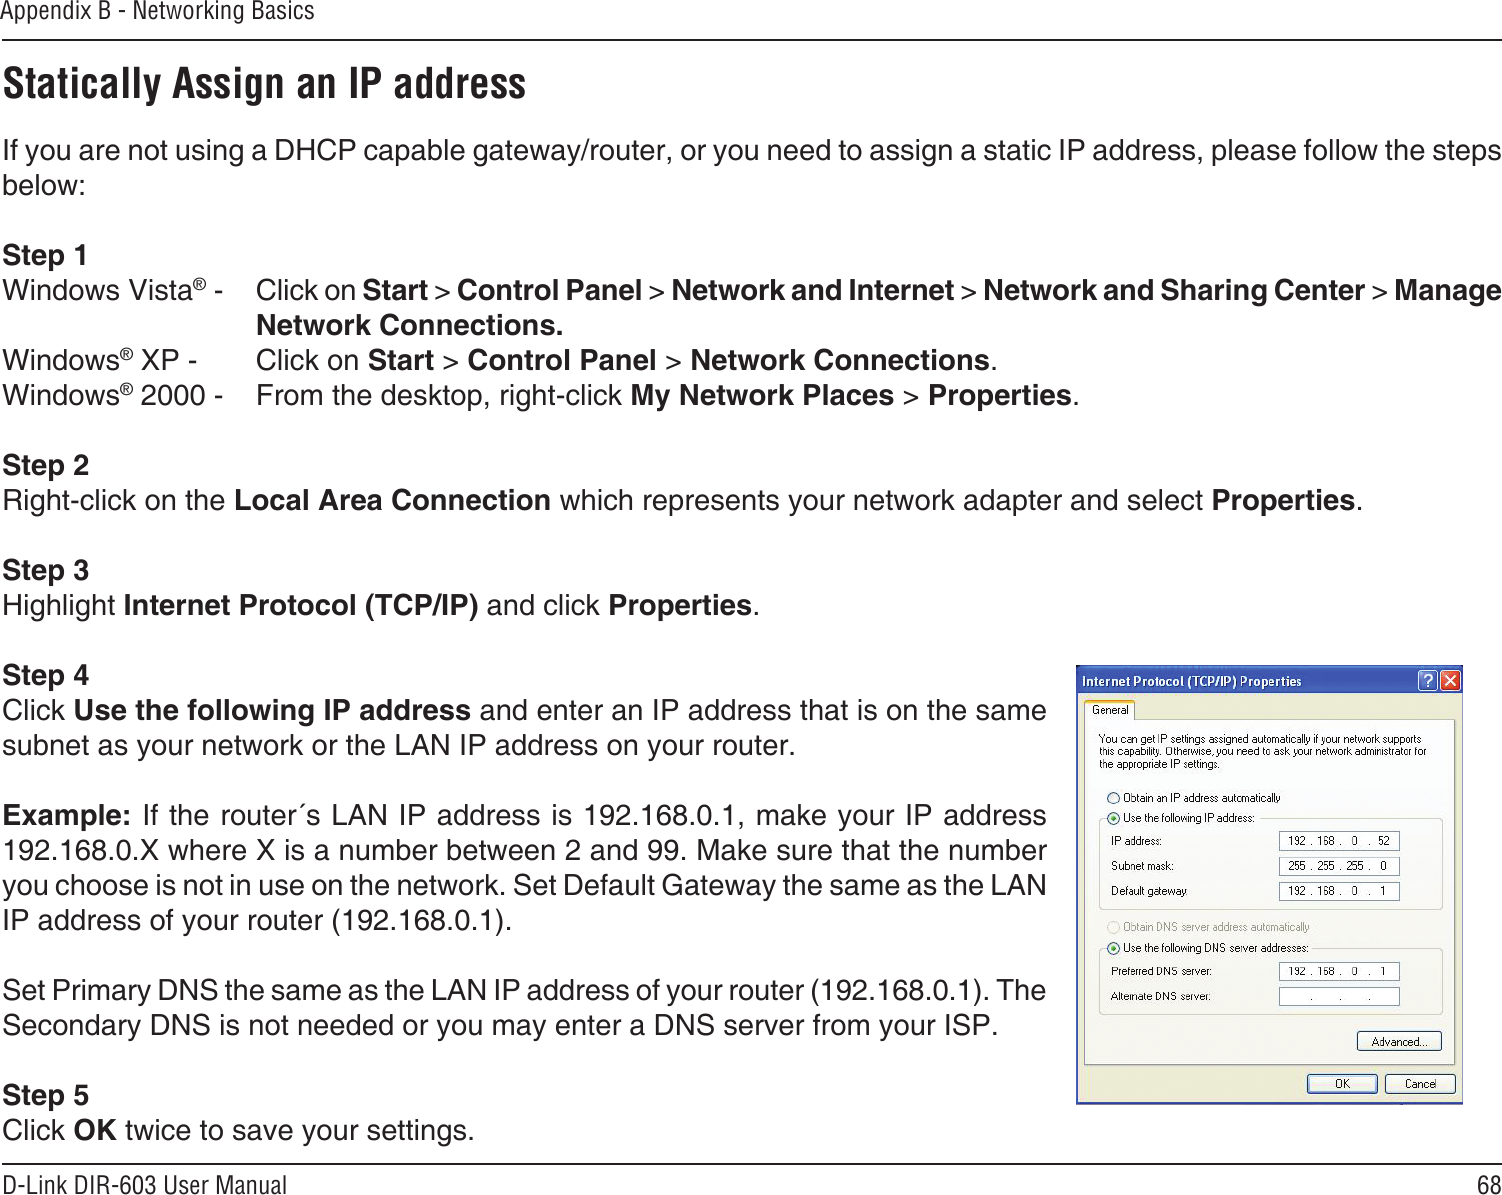 68D-Link DIR-603 User ManualAppendix B - Networking BasicsStatically Assign an IP addressIf you are not using a DHCP capable gateway/router, or you need to assign a static IP address, please follow the steps below:Step 1Windows Vista® -  Click on Start &gt; Control Panel &gt; Network and Internet &gt; Network and Sharing Center &gt; Manage Network Connections.Windows® XP -  Click on Start &gt; Control Panel &gt; Network Connections.Windows® 2000 -  From the desktop, right-click My Network Places &gt; Properties.Step 2Right-click on the Local Area Connection which represents your network adapter and select Properties.Step 3Highlight Internet Protocol (TCP/IP) and click Properties.Step 4Click Use the following IP address and enter an IP address that is on the same subnet as your network or the LAN IP address on your router. Example: If the router´s LAN IP address is 192.168.0.1, make your IP address 192.168.0.X where X is a number between 2 and 99. Make sure that the number you choose is not in use on the network. Set Default Gateway the same as the LAN IP address of your router (192.168.0.1). Set Primary DNS the same as the LAN IP address of your router (192.168.0.1). The Secondary DNS is not needed or you may enter a DNS server from your ISP.Step 5Click OK twice to save your settings.